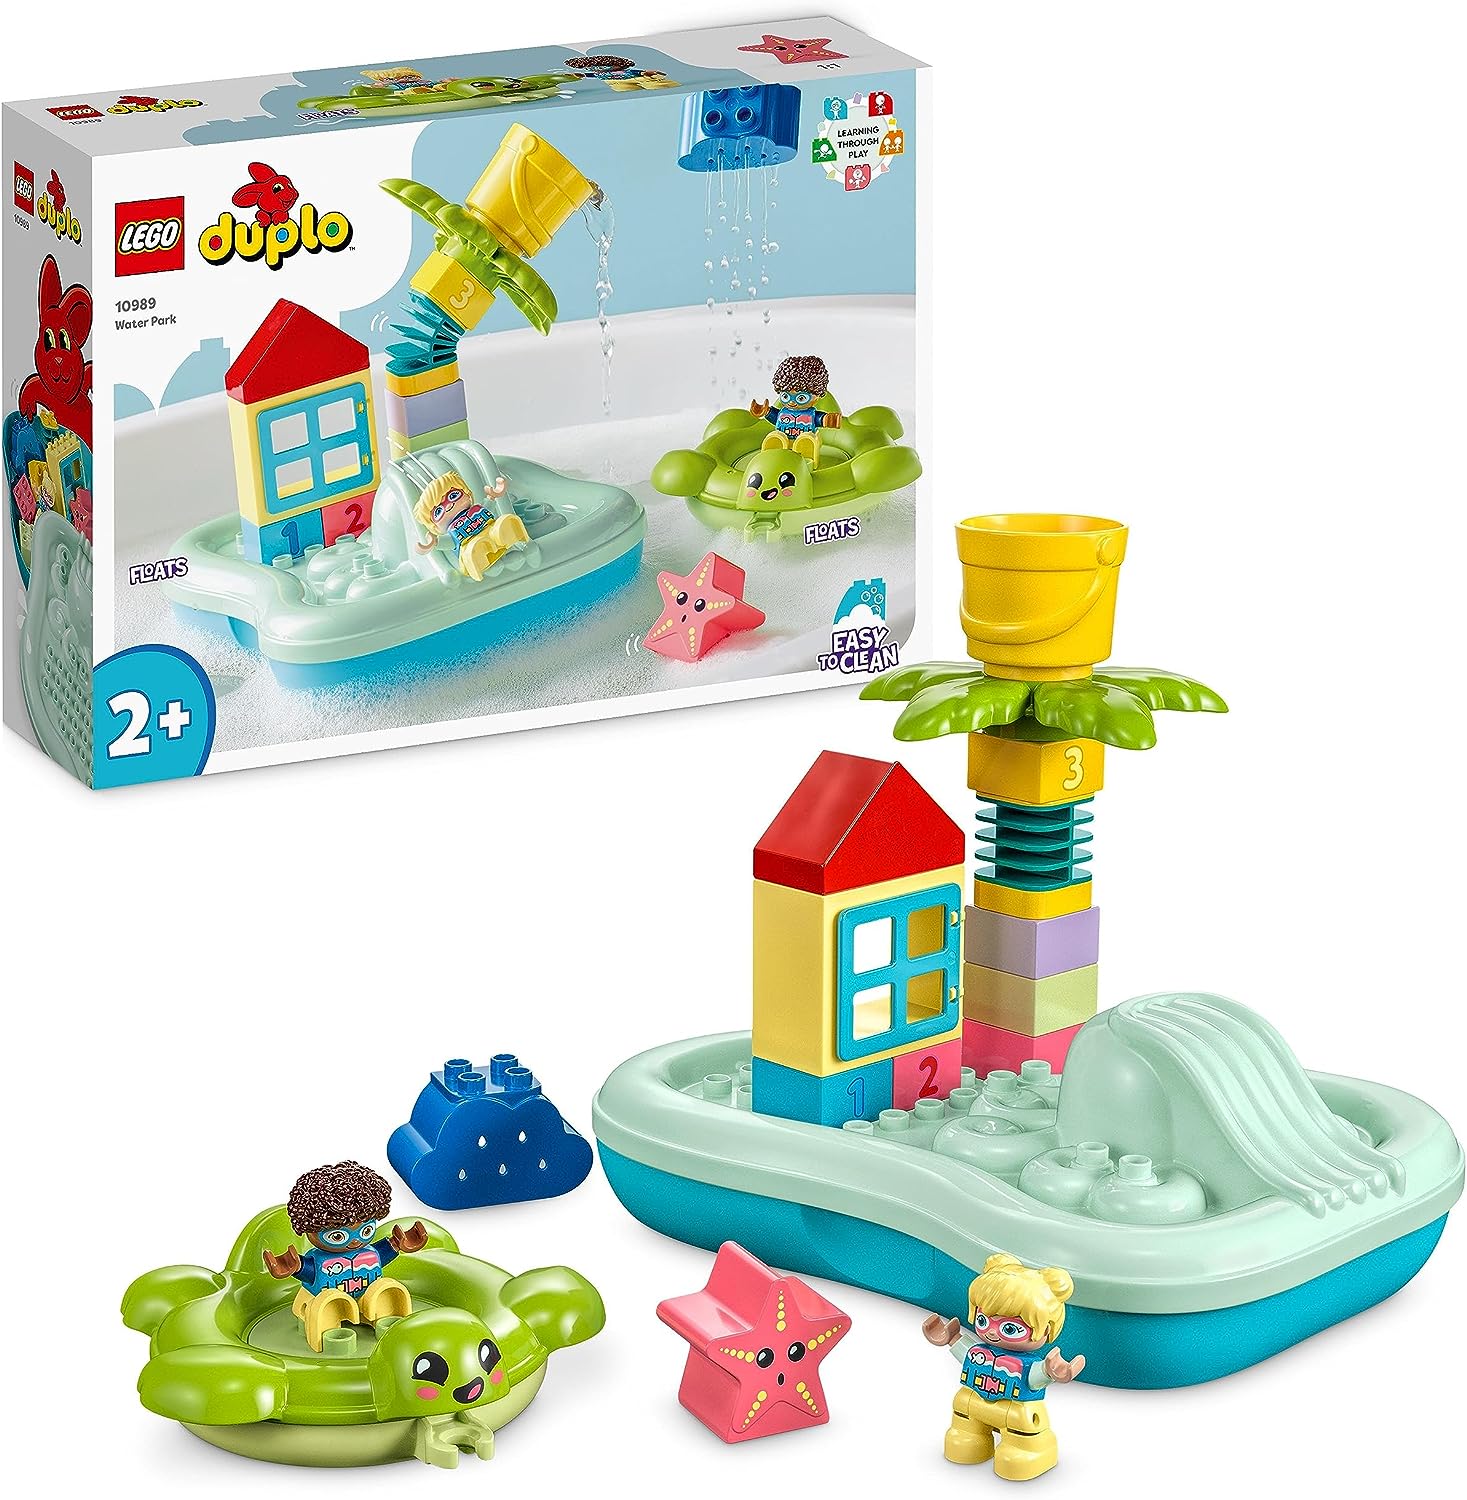 LEGO 10989 DUPLO Water Slide Set, Bath Toy for Toddlers from 2 Years, with Floating Island, Turtle and Starfish Animal Figures, Easy to Clean Bath Water Toy